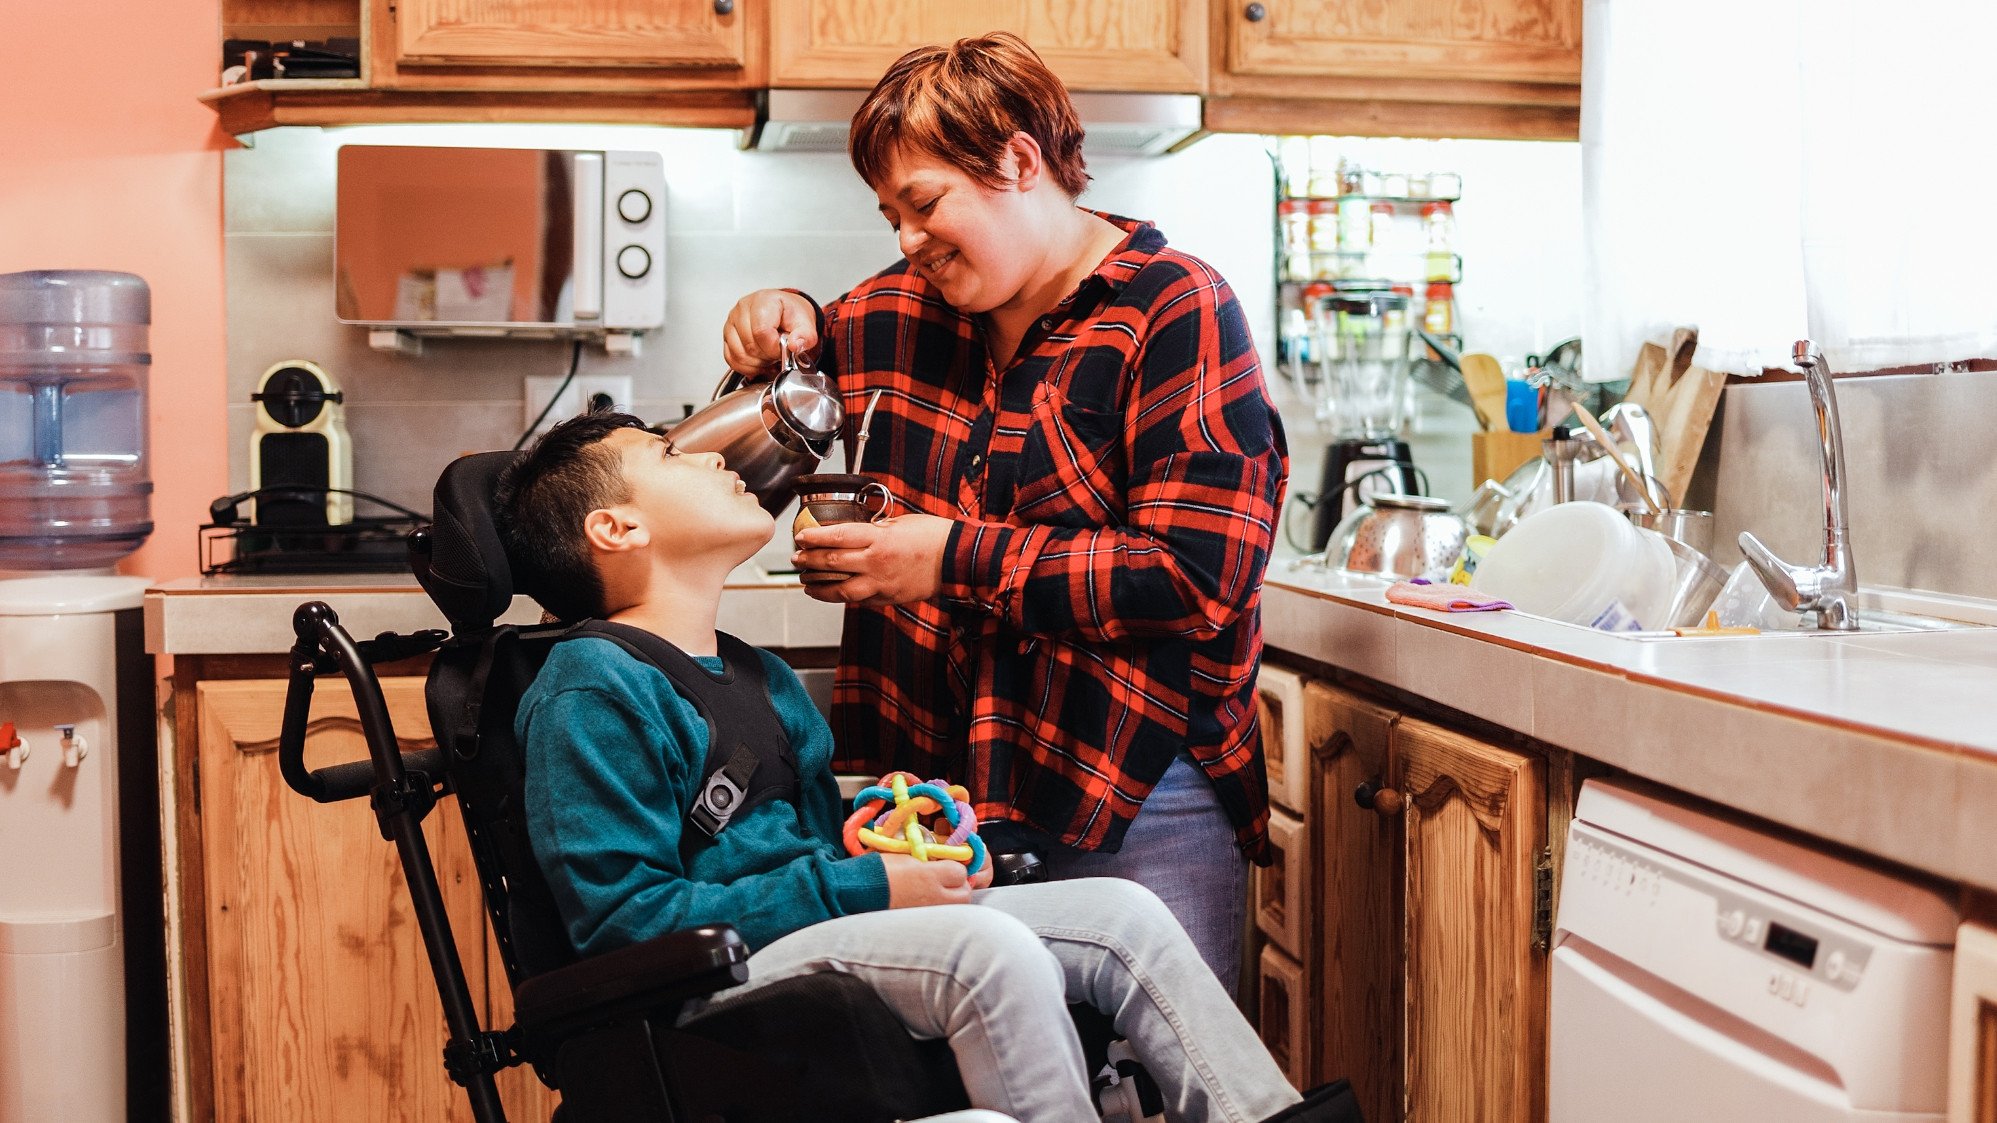 A carer pouring a cup of coffee while talking to a child in an assistive chair